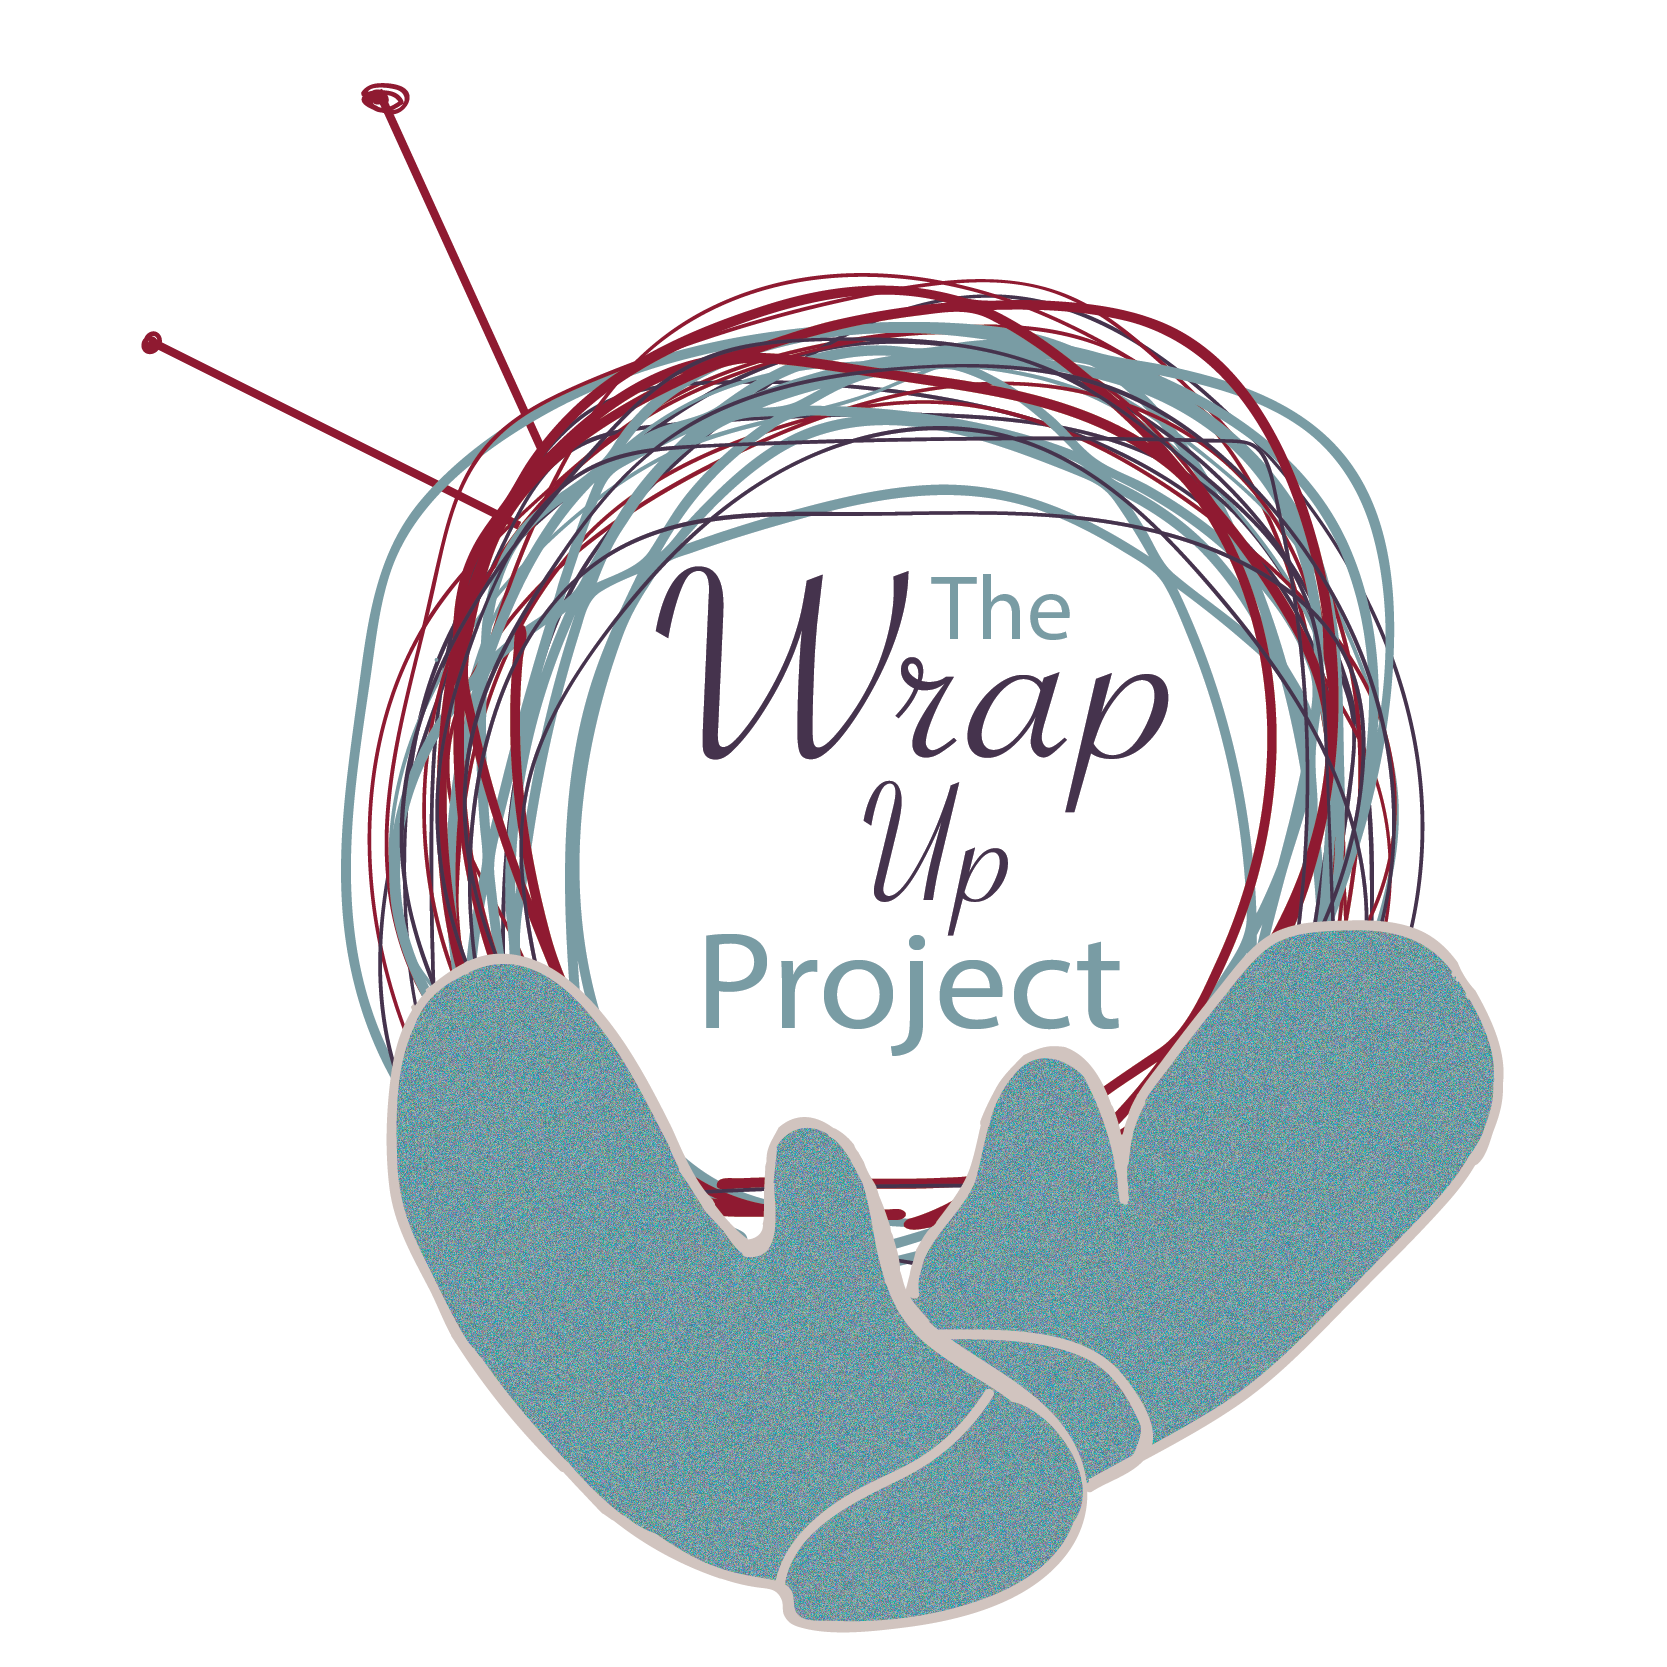 The Wrap Up Project